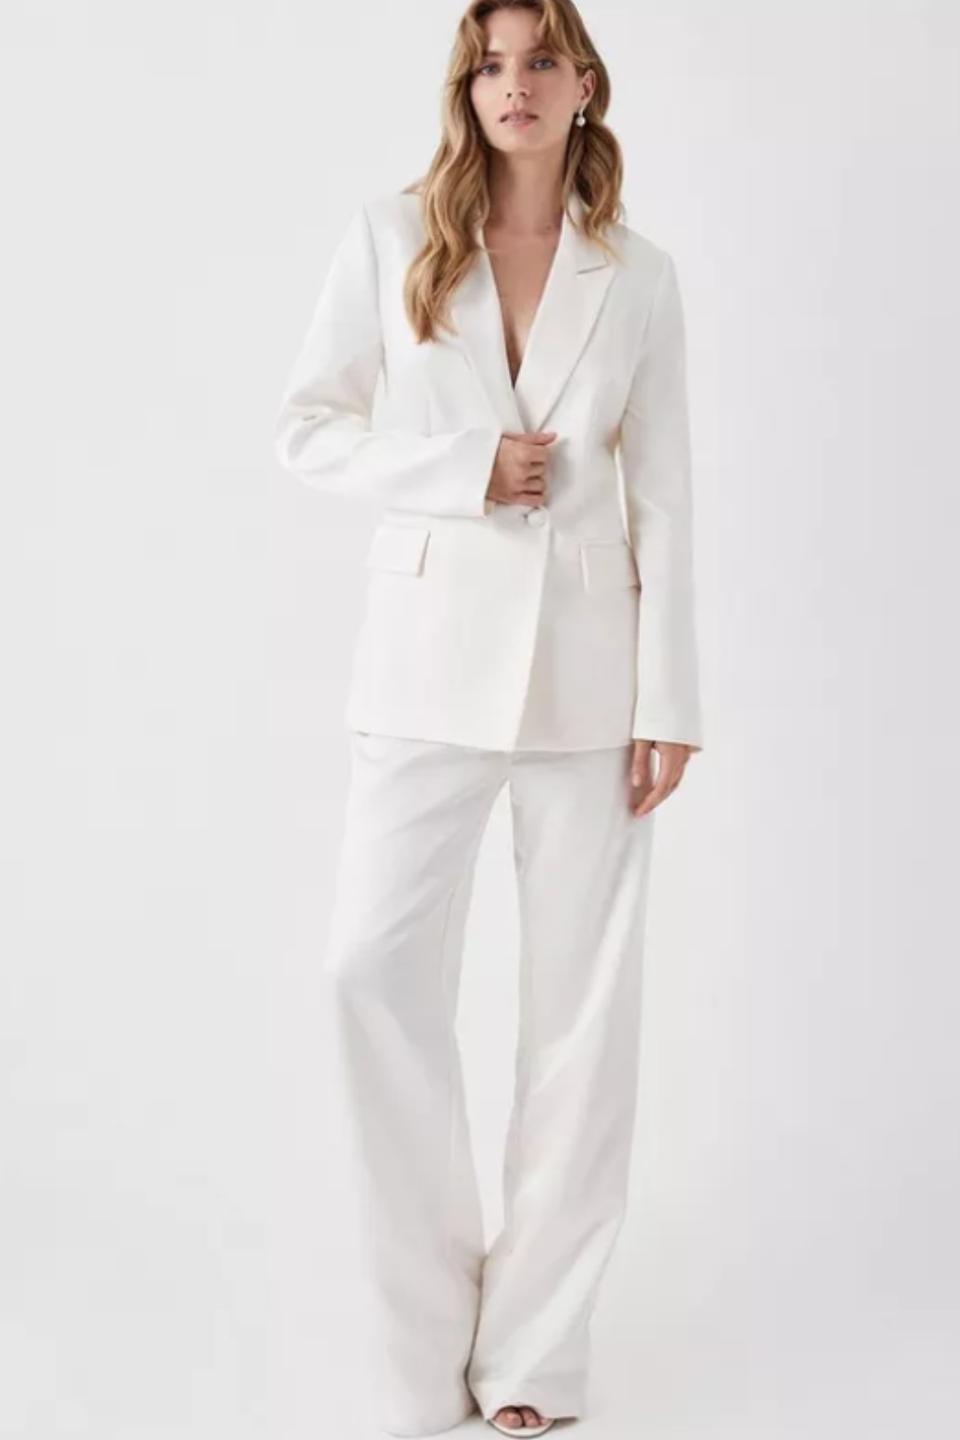 Wedding Suits for Women: 20 Stylish & Powerful Bridal Trouser Suits ...